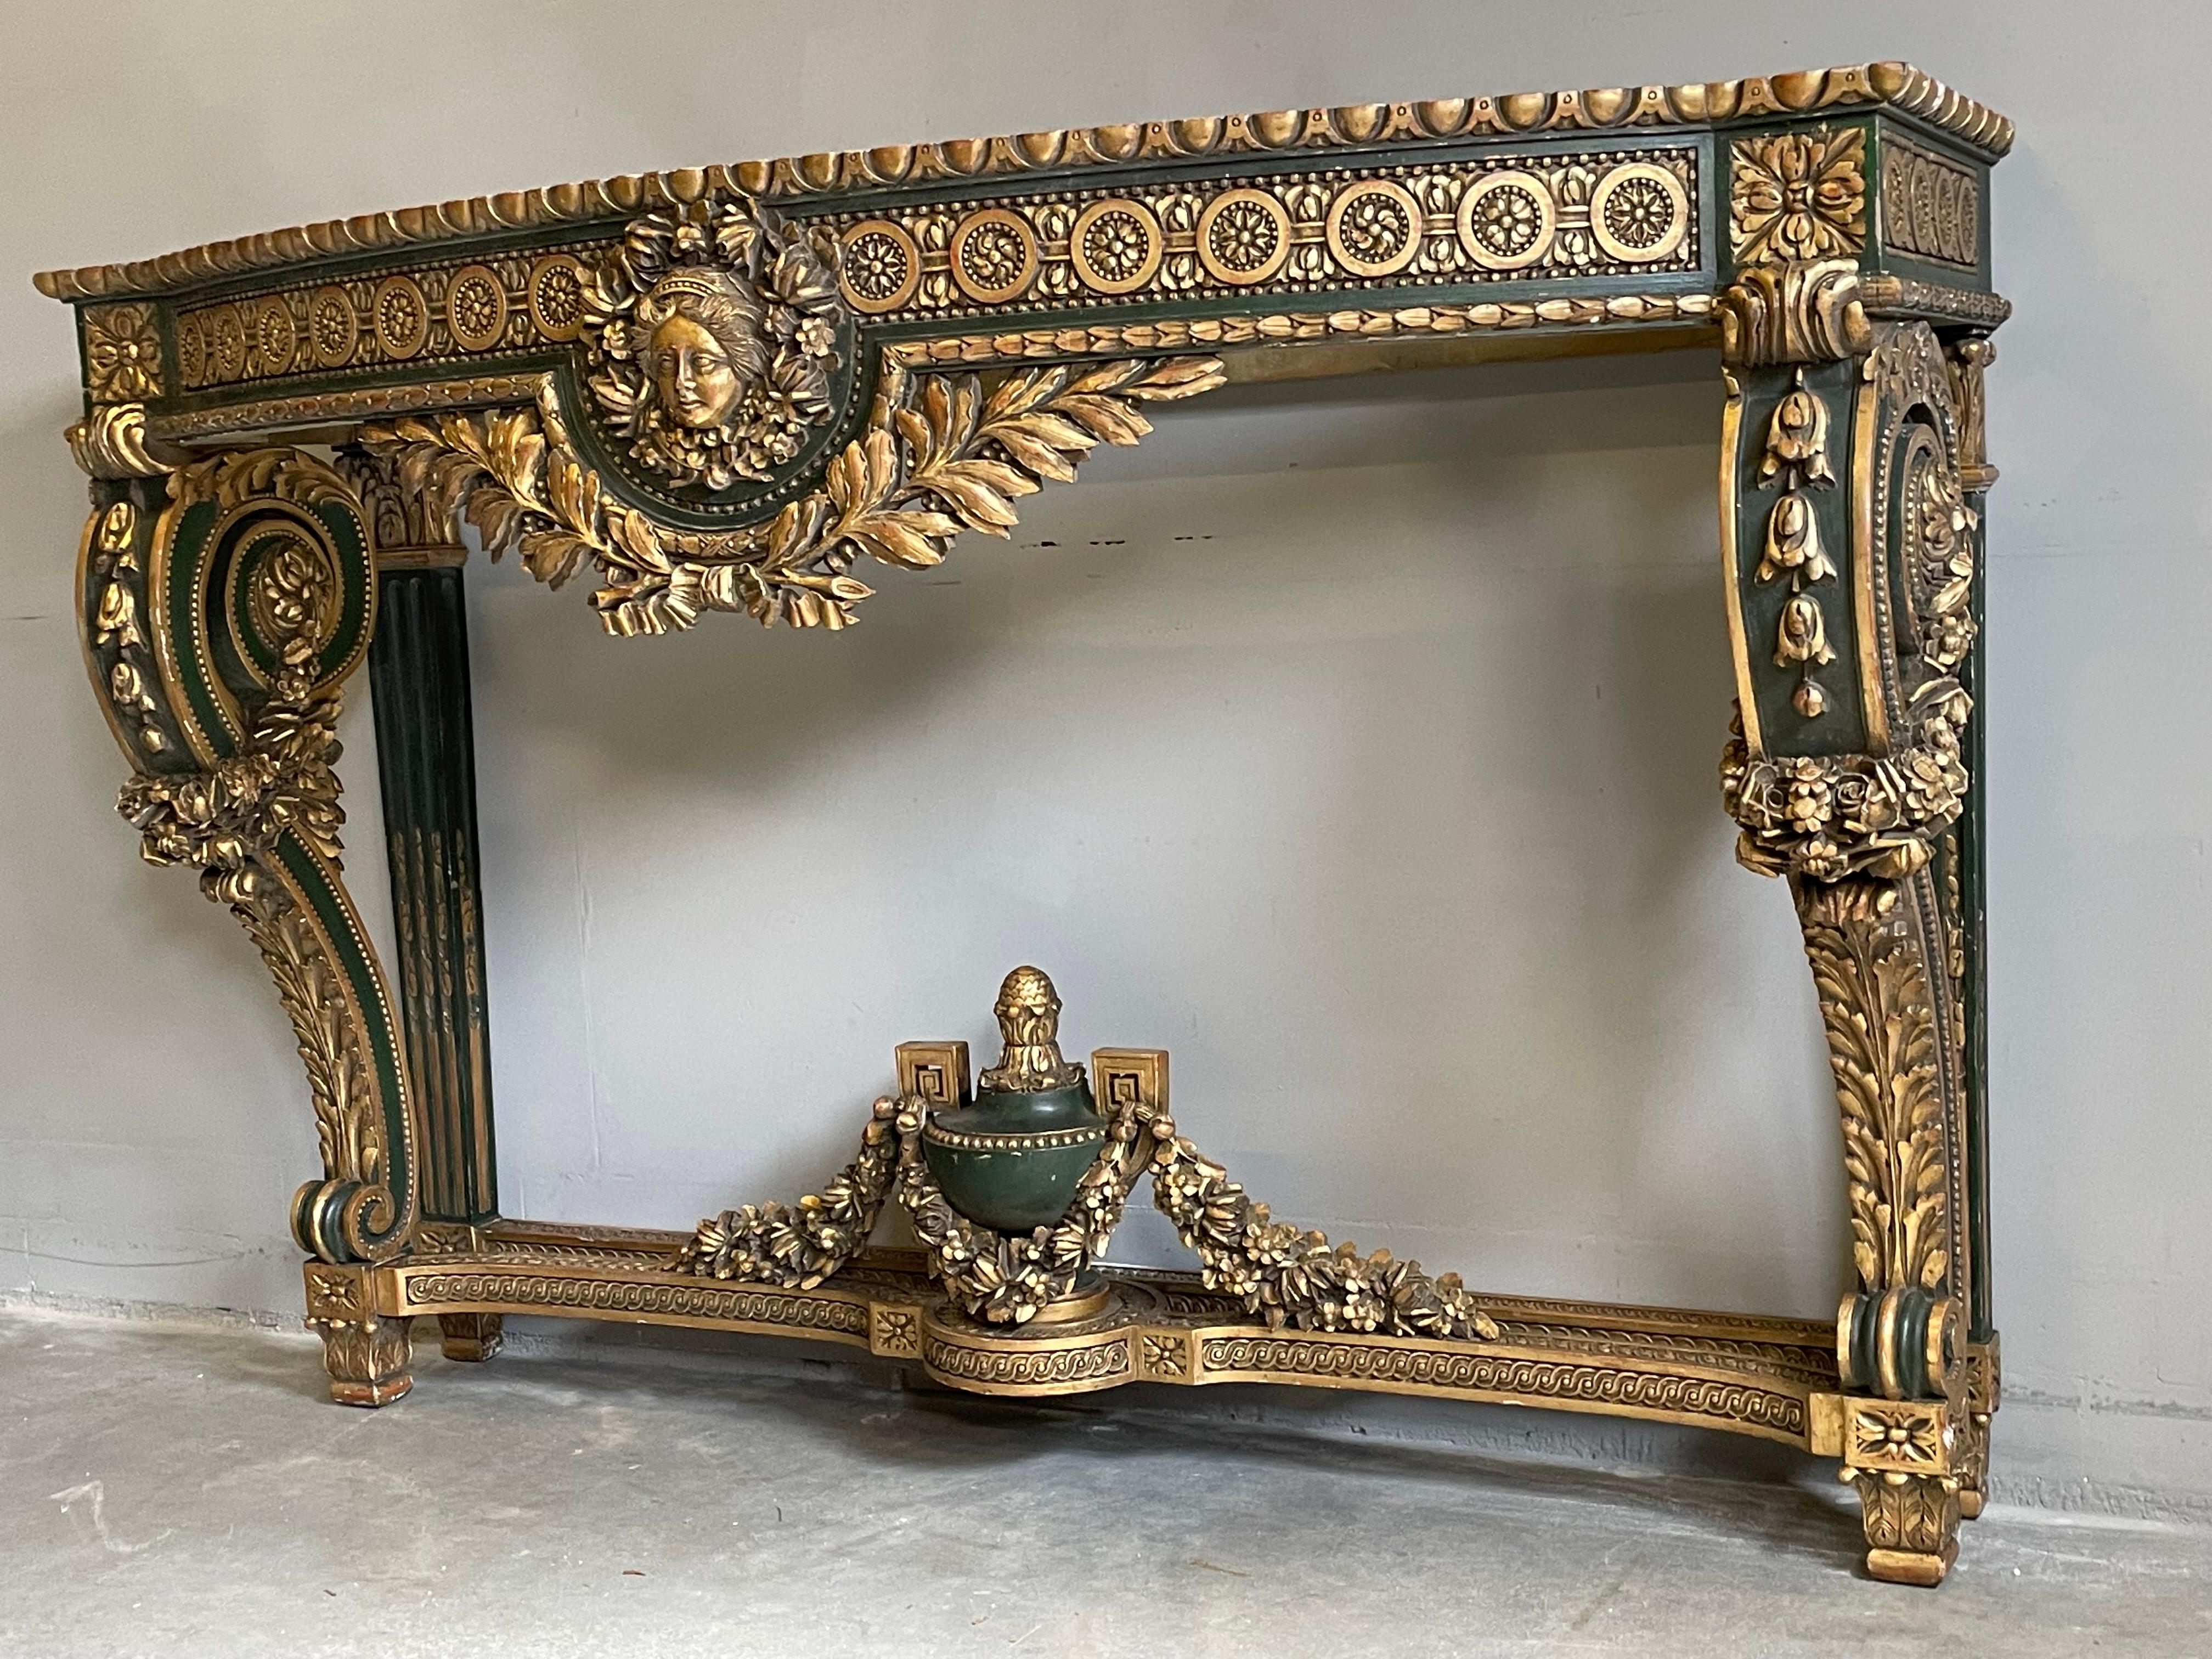 Unique, stunning and one of the largest antique sidetables we ever saw.

If you are looking for a large and impressive sidetable to grace your entrance or another room that can do with a top-quality-eyecatcher-table then this large and superb